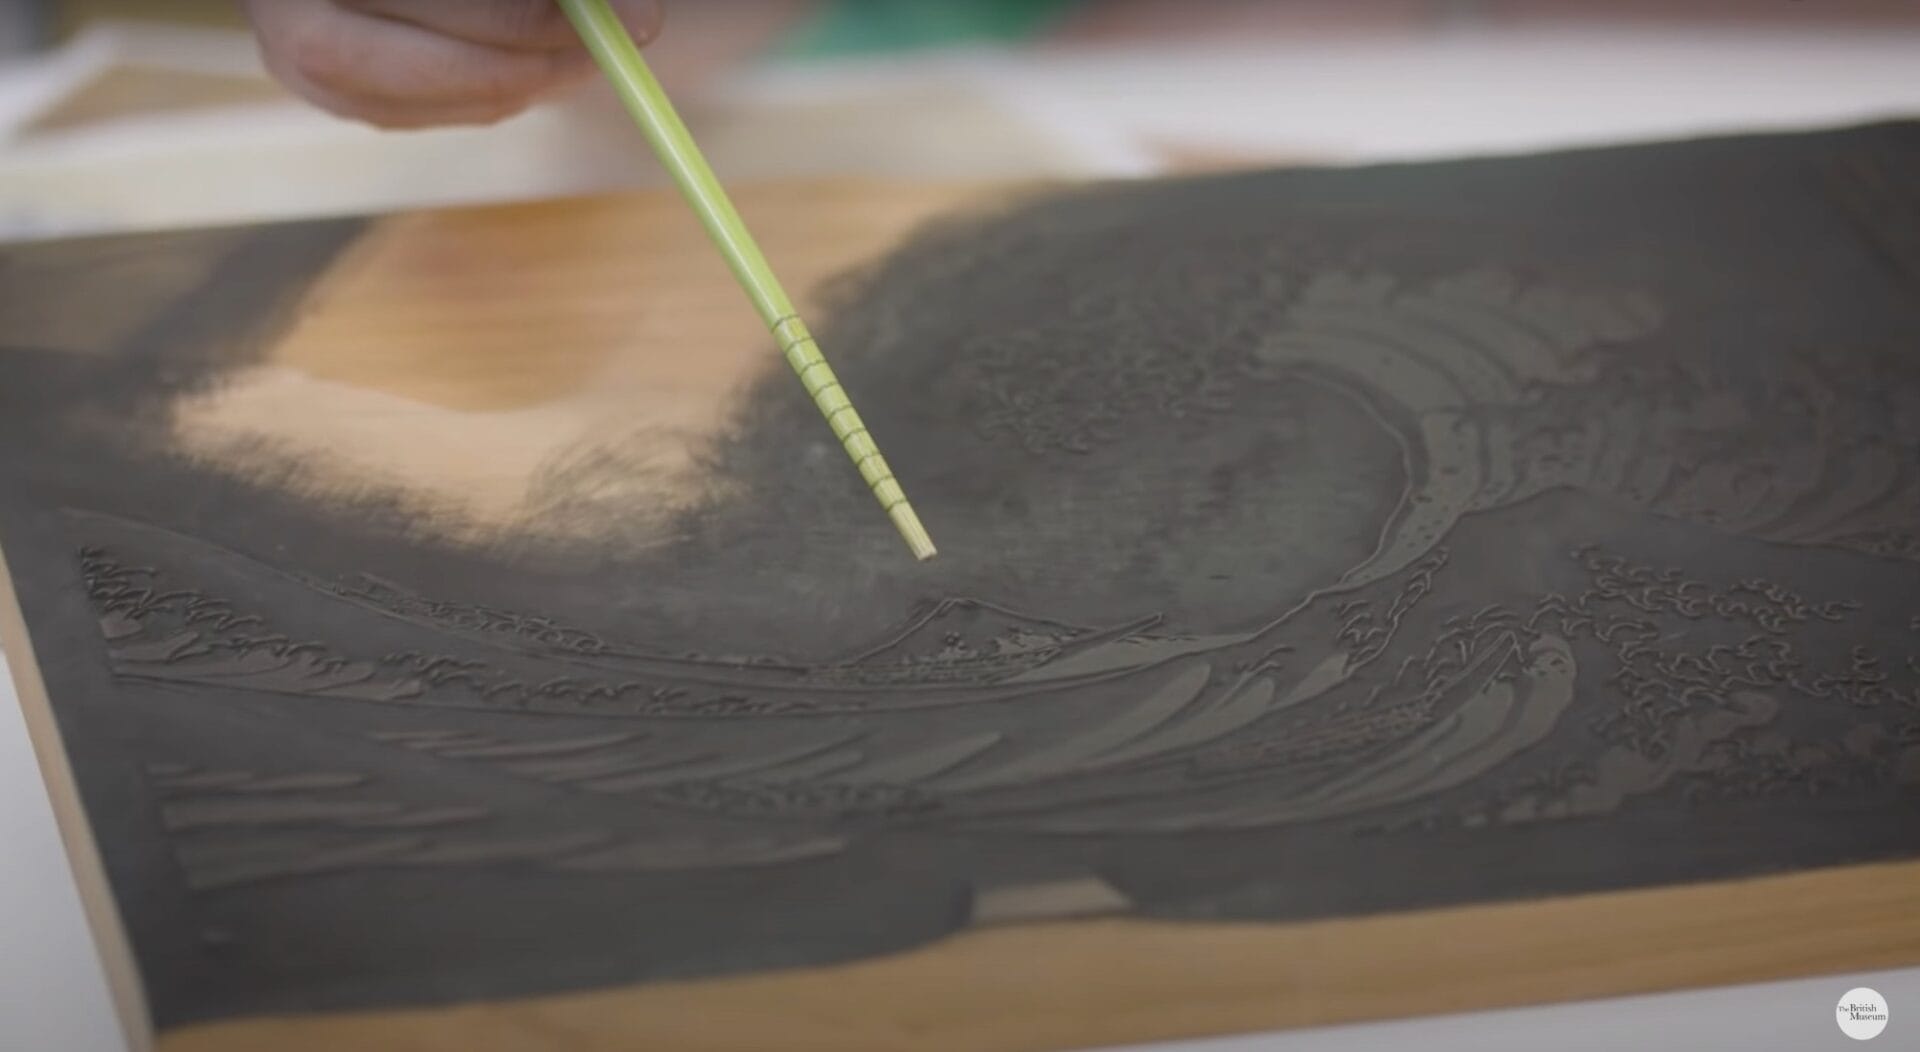 a still from a short documentary about Hokusai's "The Great Wave" print, showing a detail of a reproduced woodblock